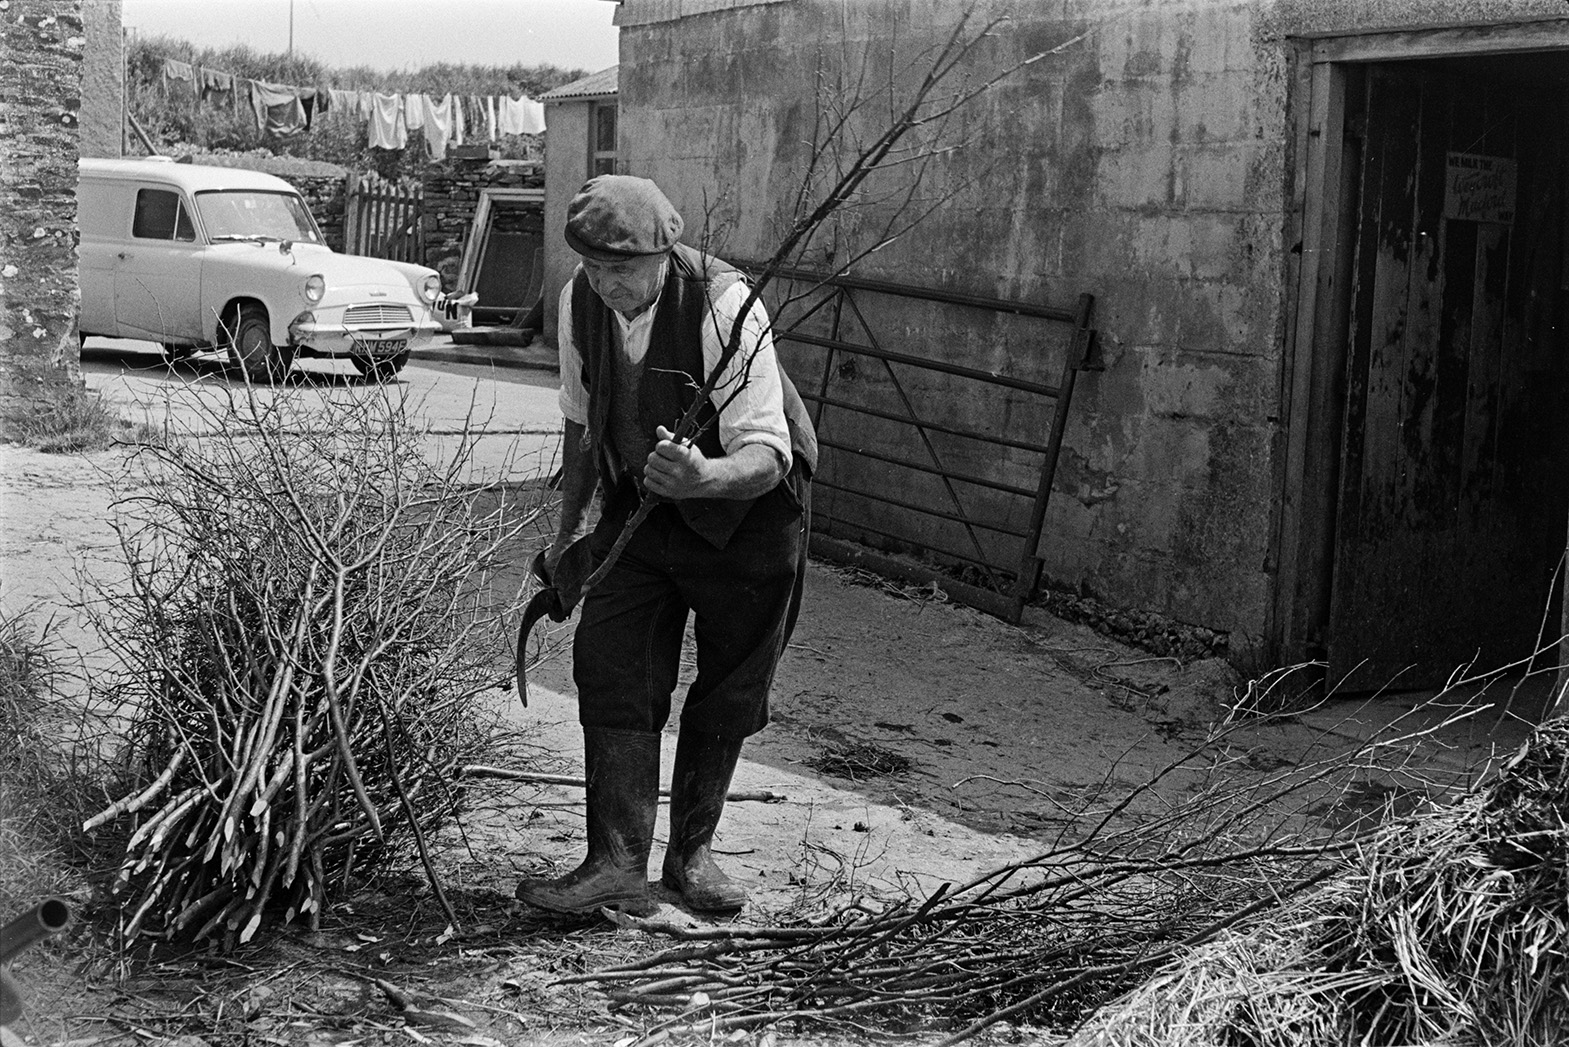 Tom Hooper trimming pea stick using a bill hook, bundling them up in a farmyard at Beaford. A van and washing line can be seen in the background.